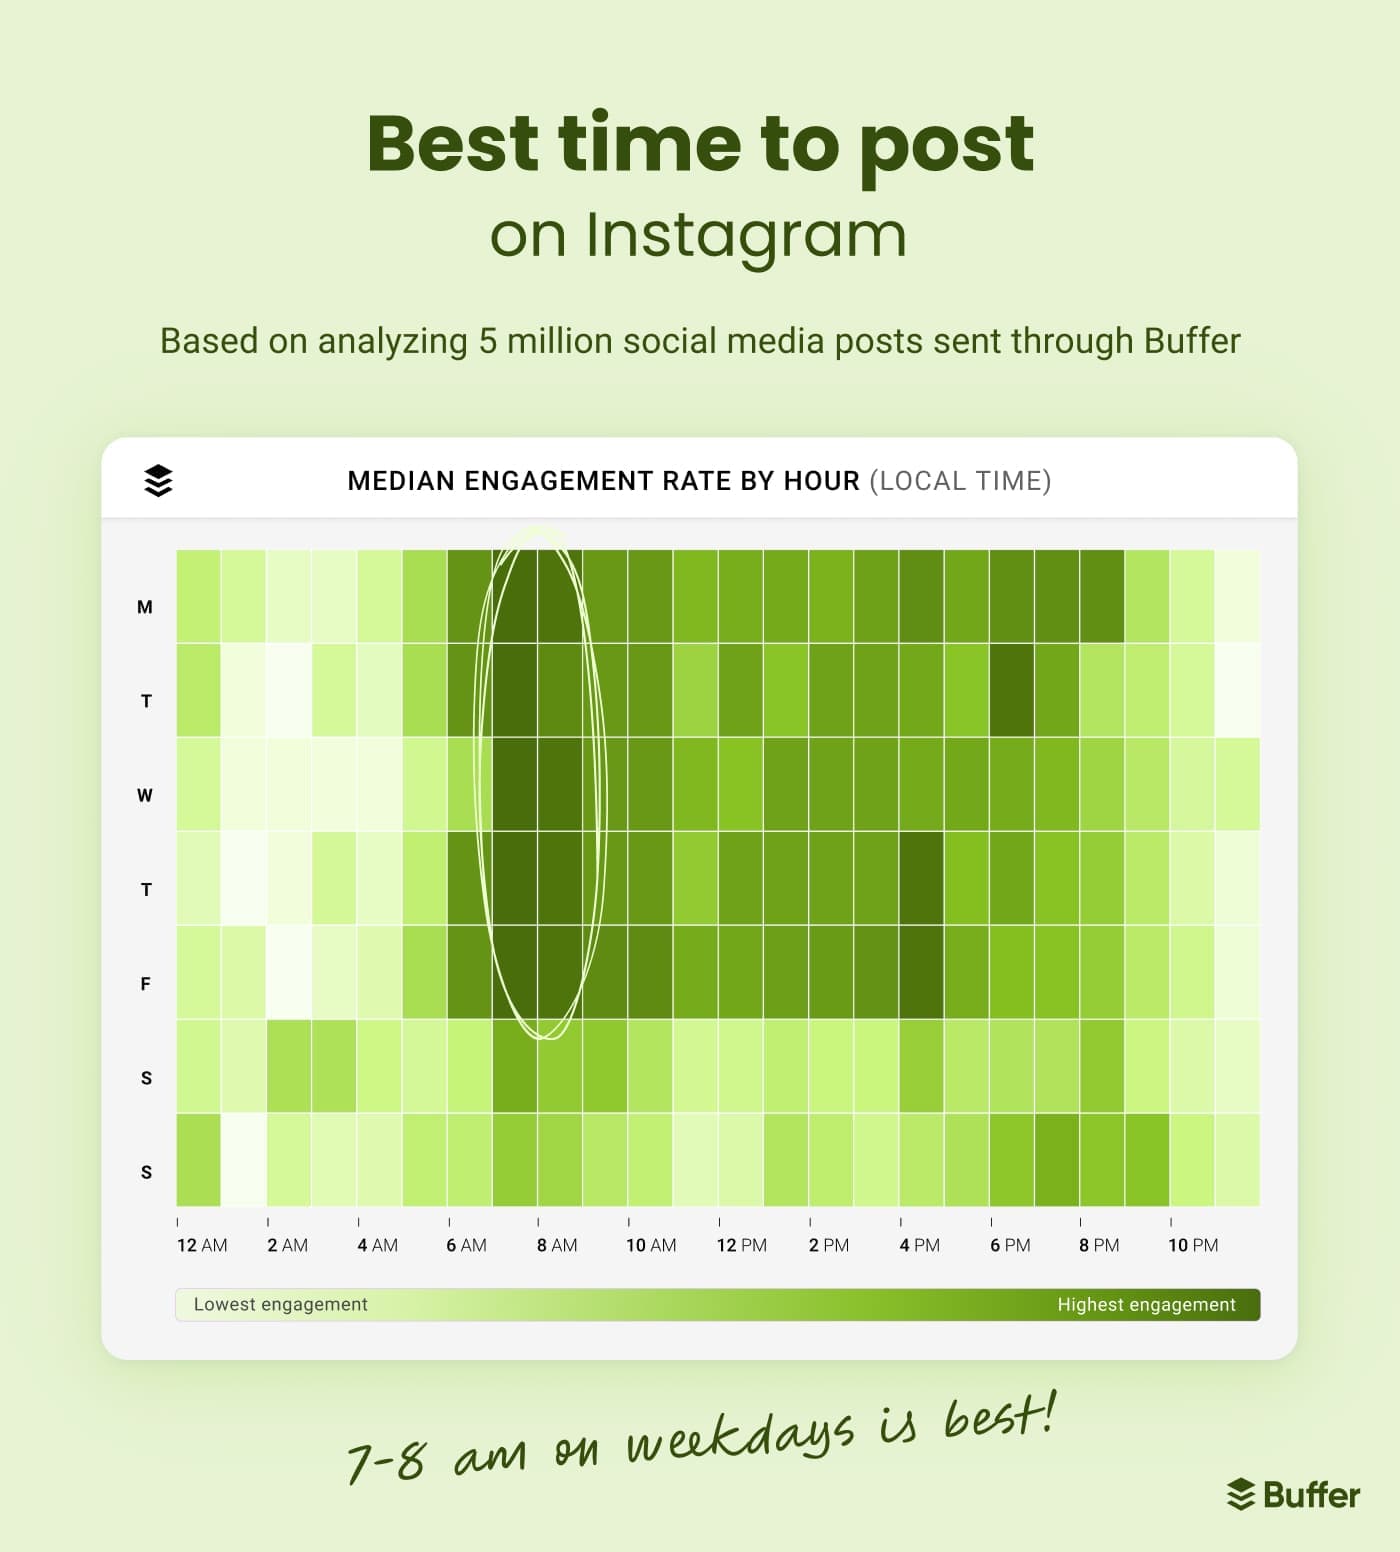 Heatmap charting the best time to post on Instagram based on analyzing 1 million social media posts sent through Buffer. 7am to 8am on weekdays is best.